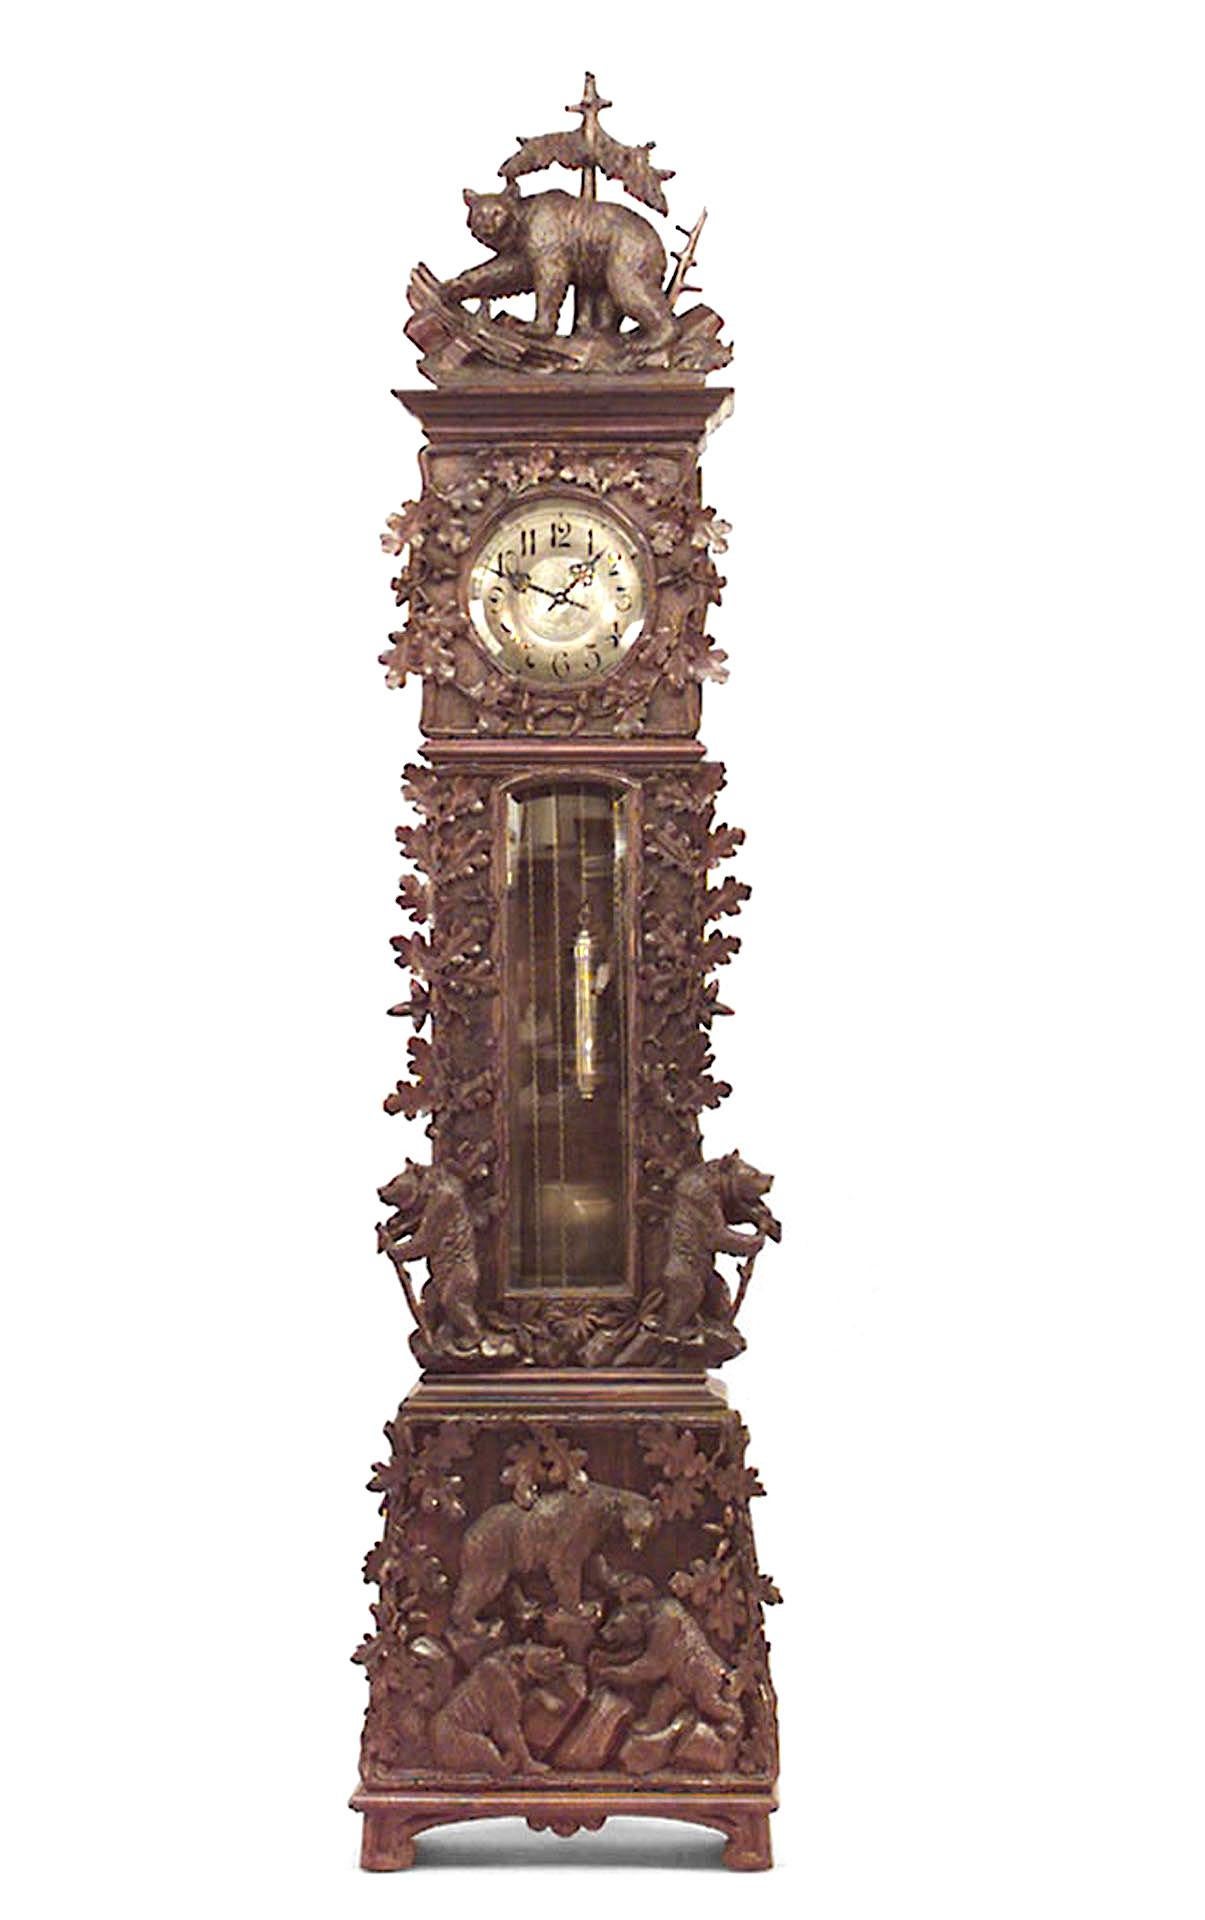 19th century rustic Black Forest grandfather clock composed of walnut elaborately carved with oak leaves and bears in high relief (Non-operational).